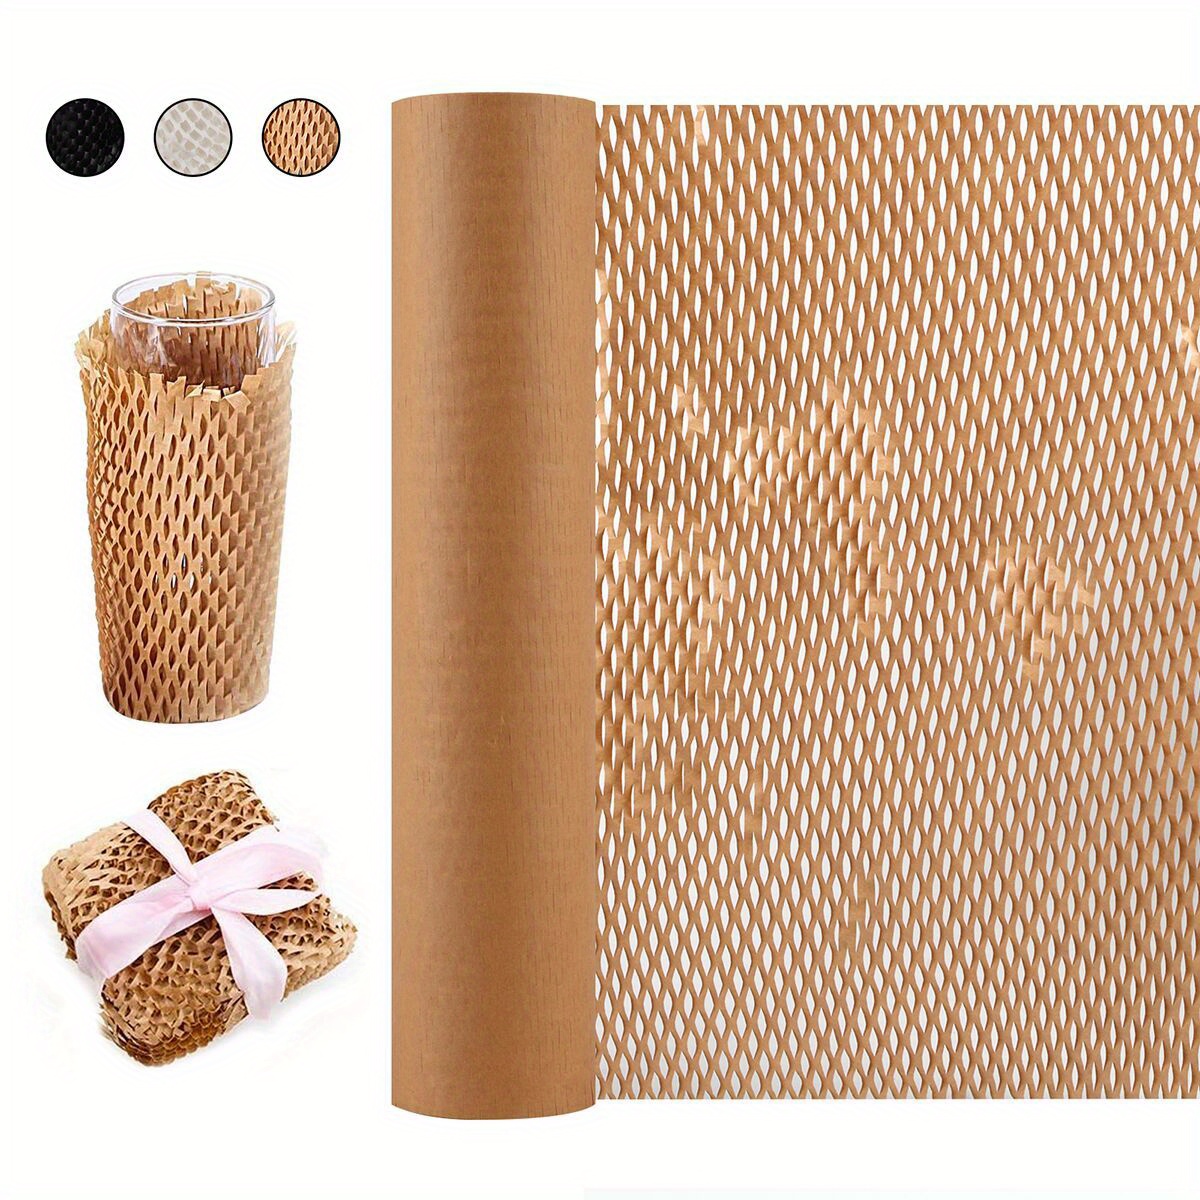 GZGDLJQ Honeycomb Packaging Paper, 15 x 135' Honeycomb Cushion Wrapping Paper for Protecting Fragile Items, used for Moving Gift Packaging and